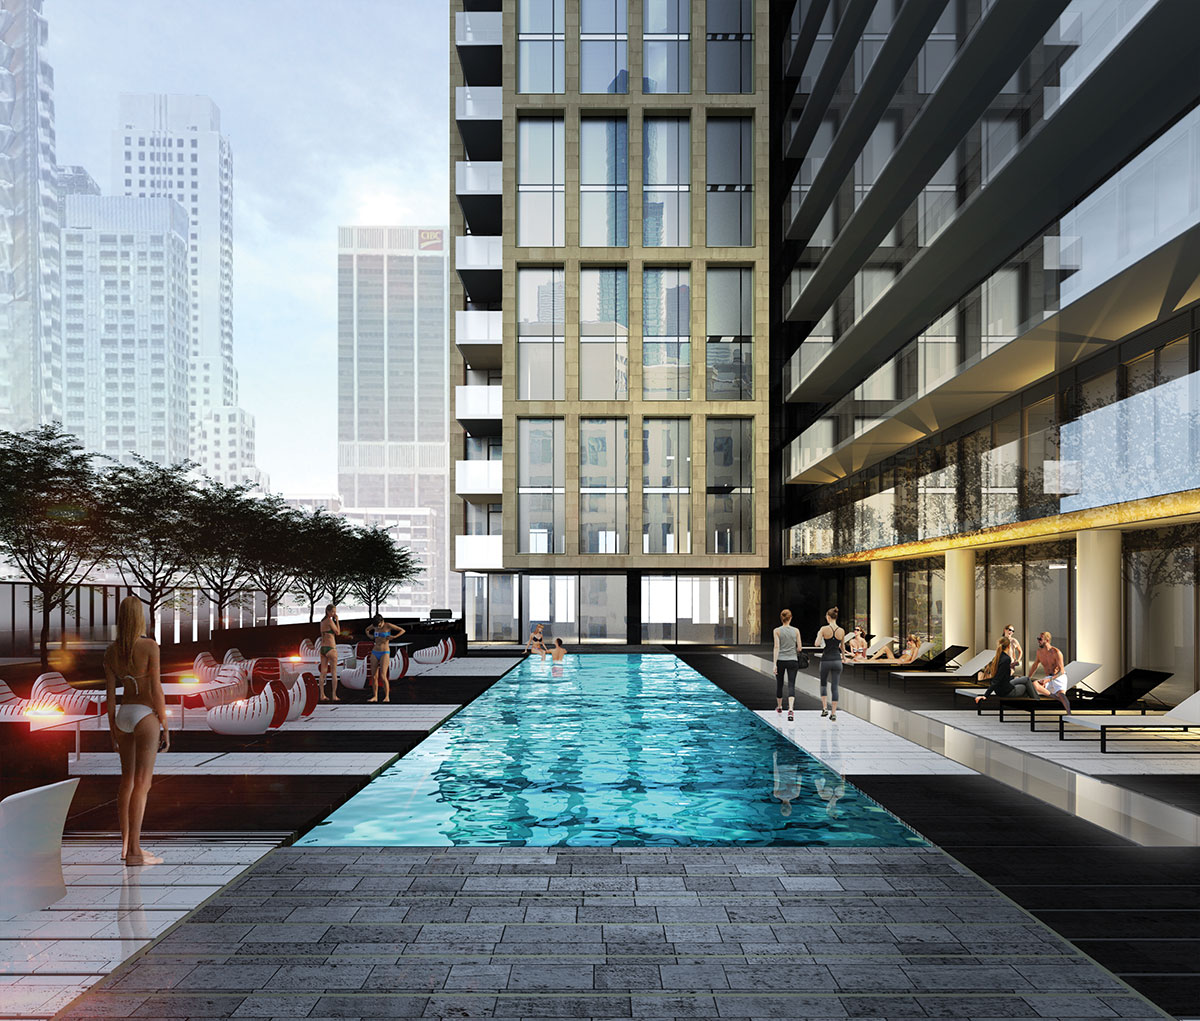 The Gloucester on Yonge, designed by architectsAlliance for Concord Adex